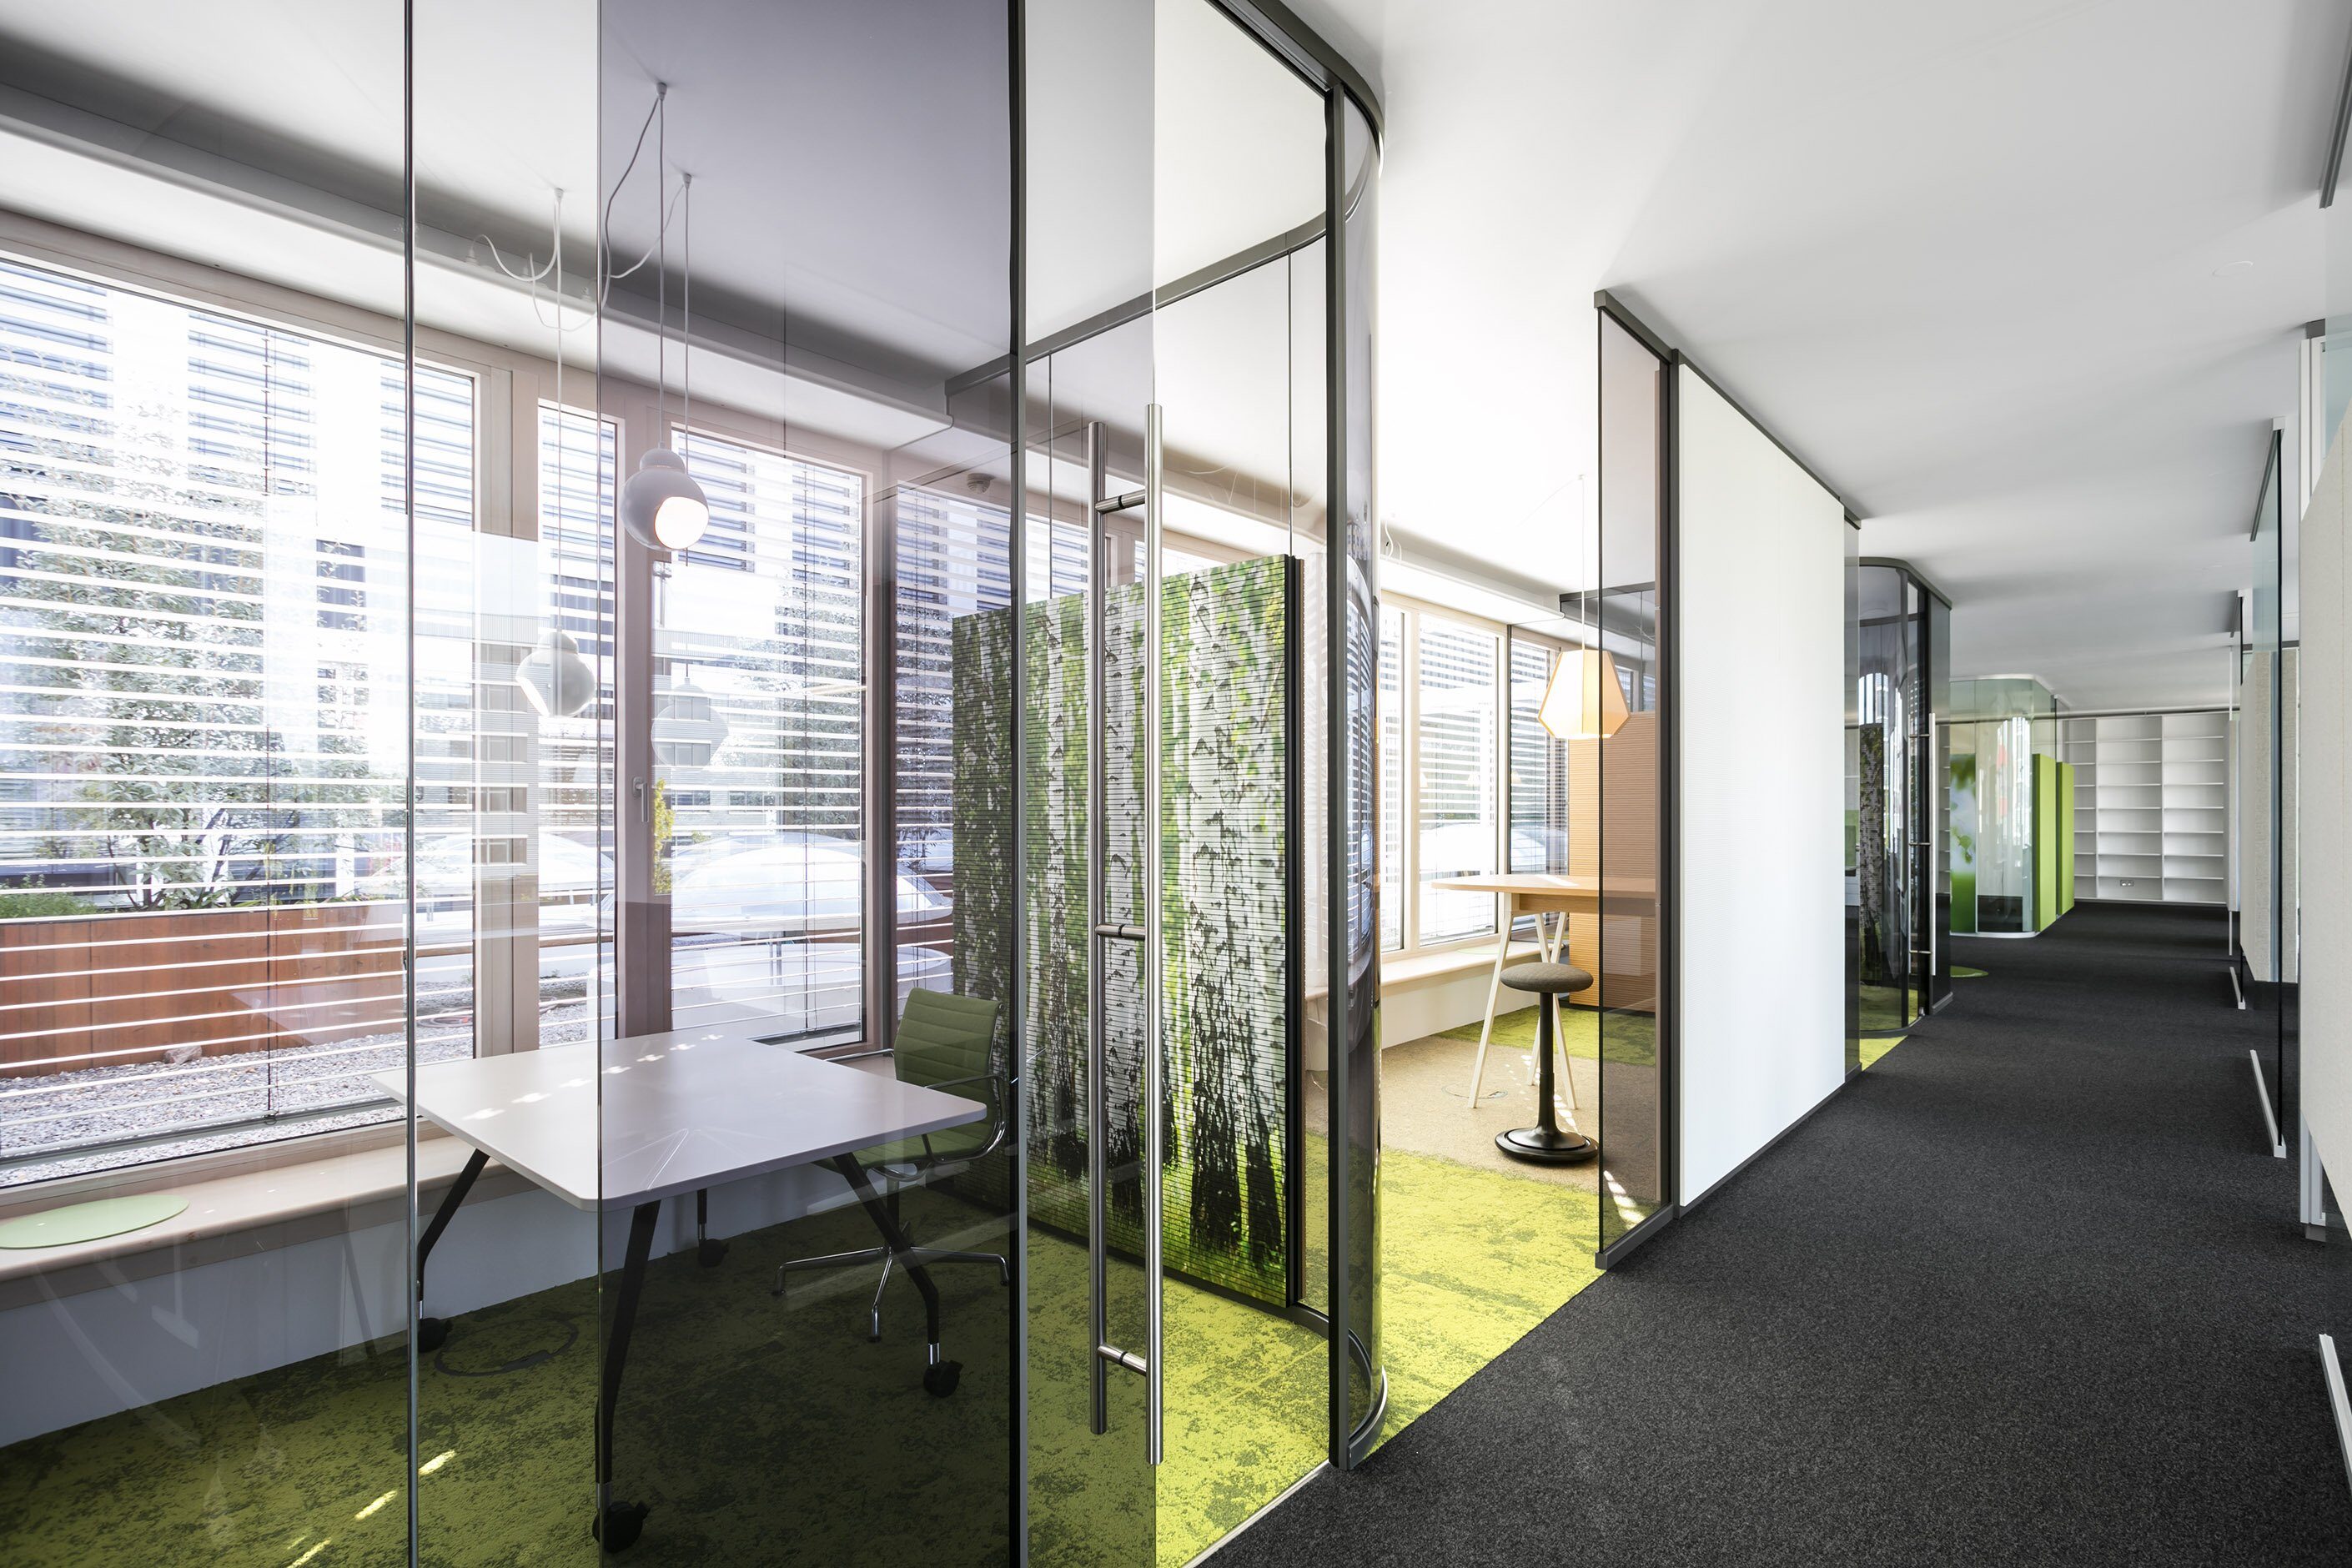 IdeenReich at feco-forum Karlsruhe │ fecowand wall panels and glass │ agile work